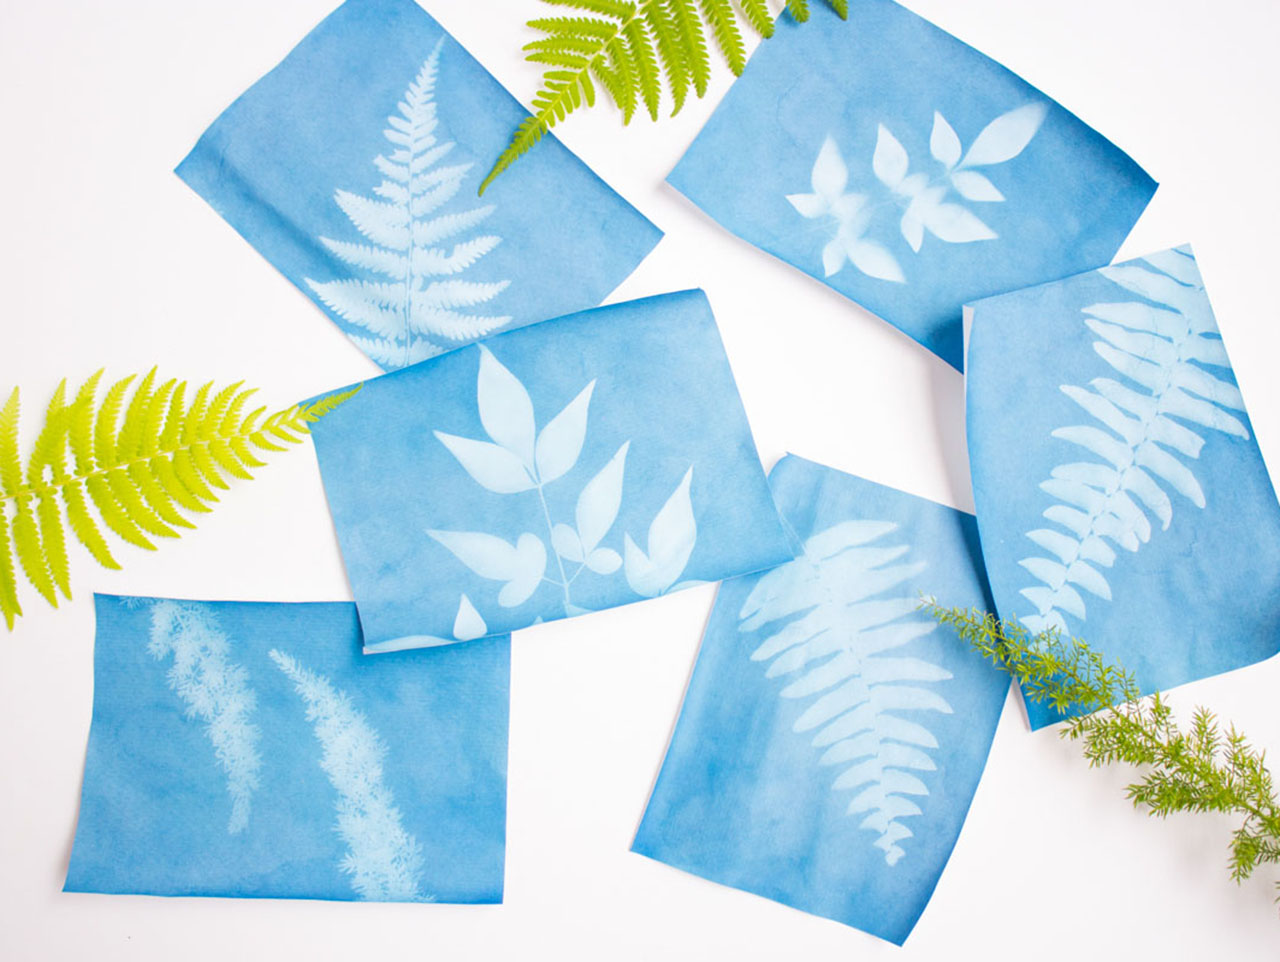 Sun Print Leaf Art using just leaves and sun-sensitive paper! Photo from Fun 365 Oriental Trading